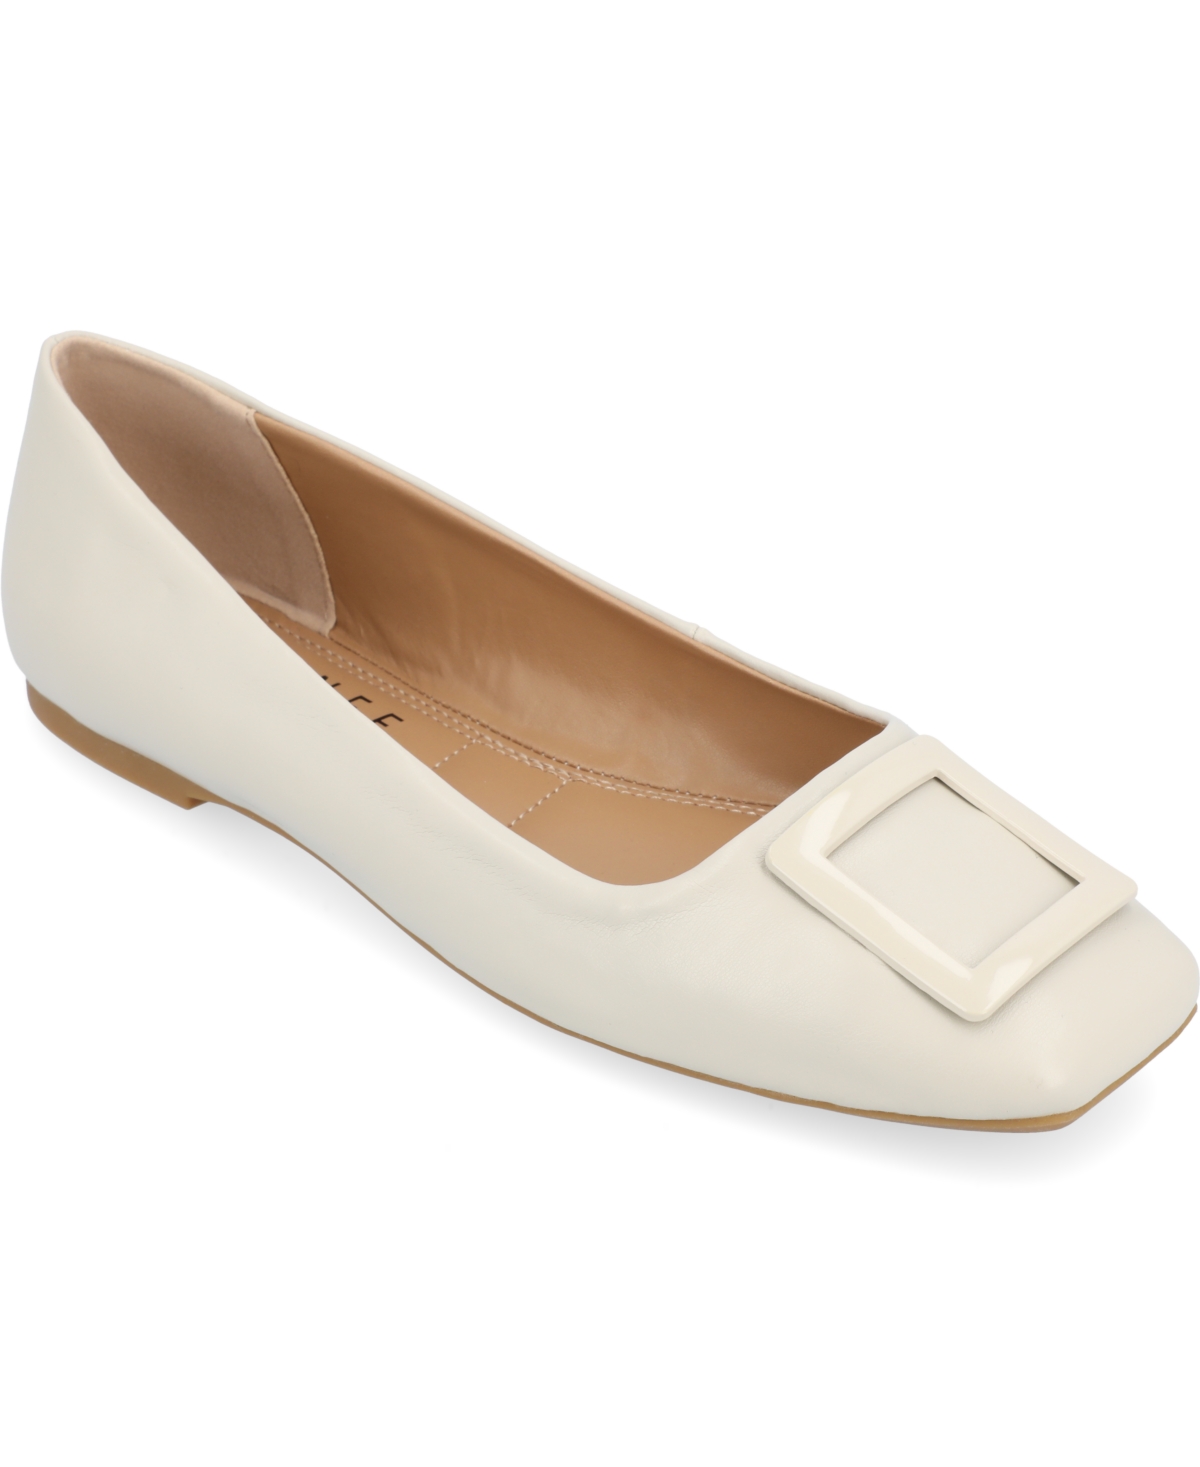 Retro Vintage Flats and Low Heel Shoes Journee Collection Womens Zimia Flats - Beige $59.99 AT vintagedancer.com